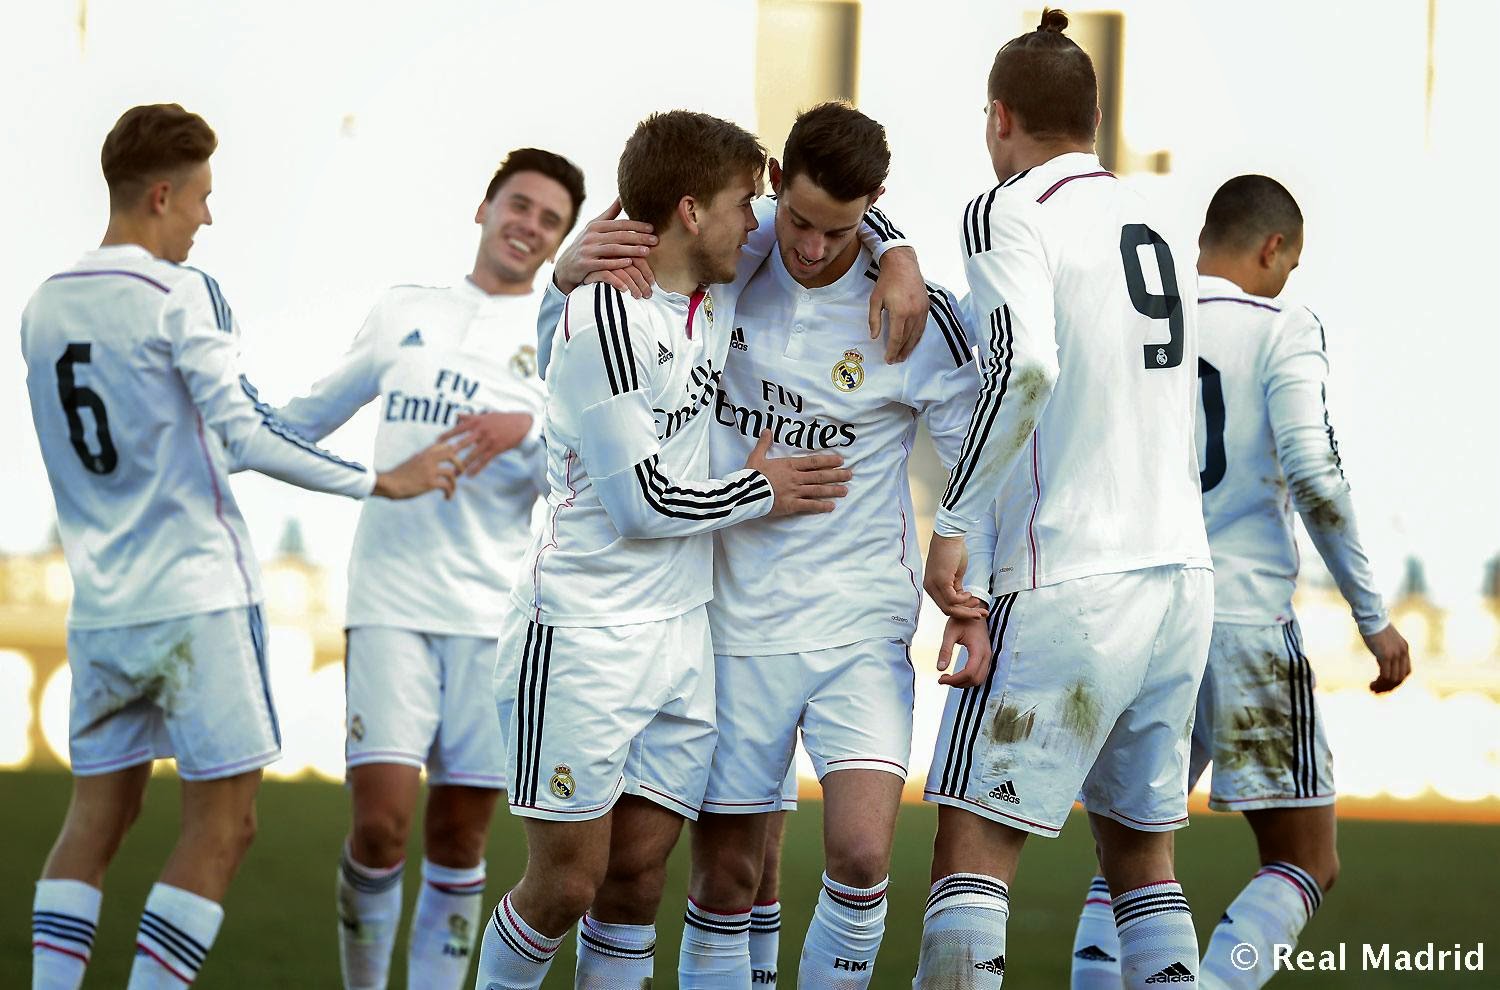 Real Madrid Castilla Backgrounds, Compatible - PC, Mobile, Gadgets| 1500x990 px